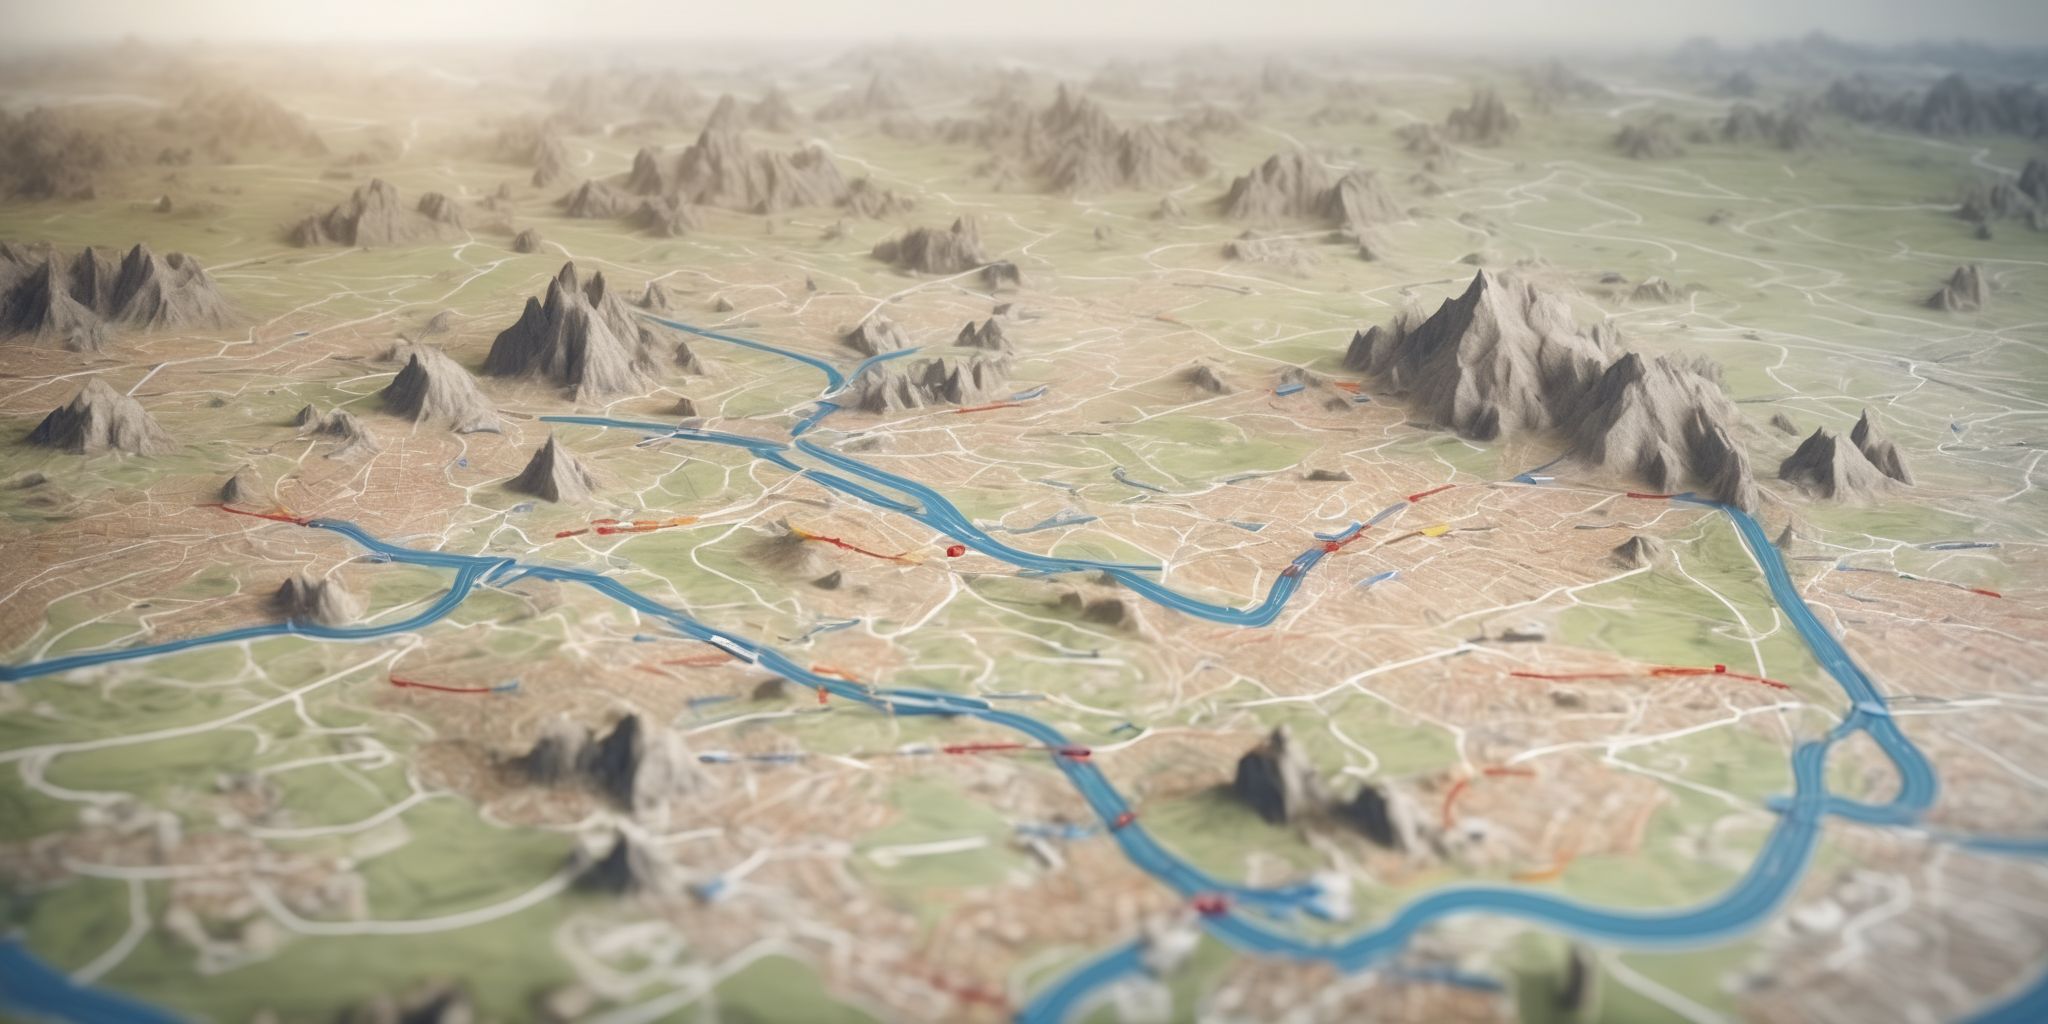 Roadmap  in realistic, photographic style